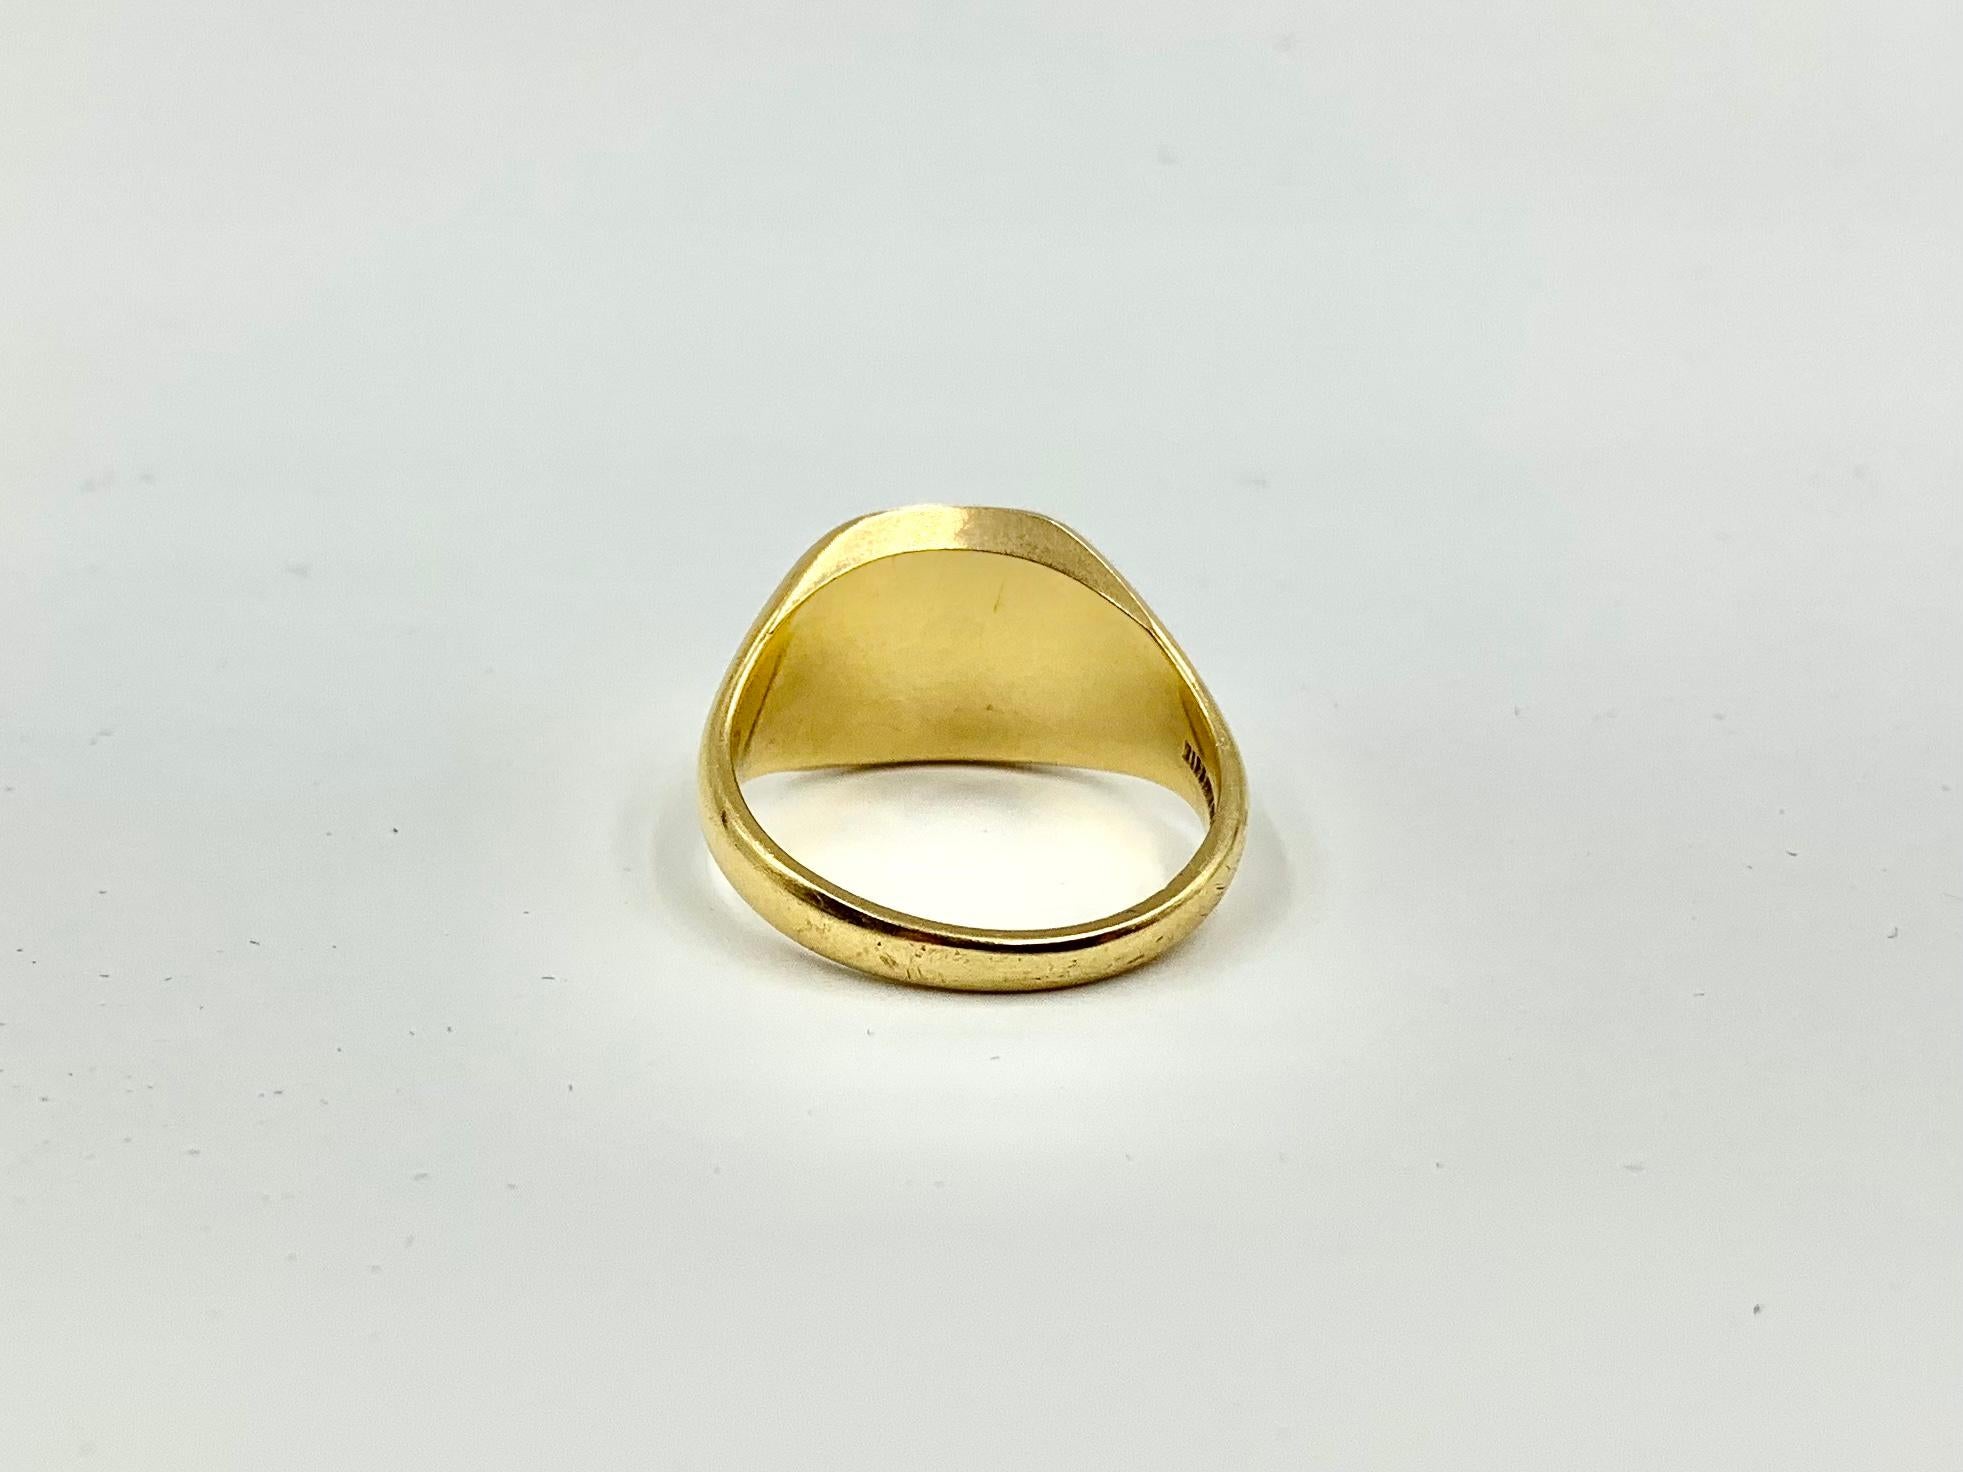 Antique Tiffany & Co. George Washington Crest Intaglio 14k Gold Signet Ring In Good Condition For Sale In New York, NY